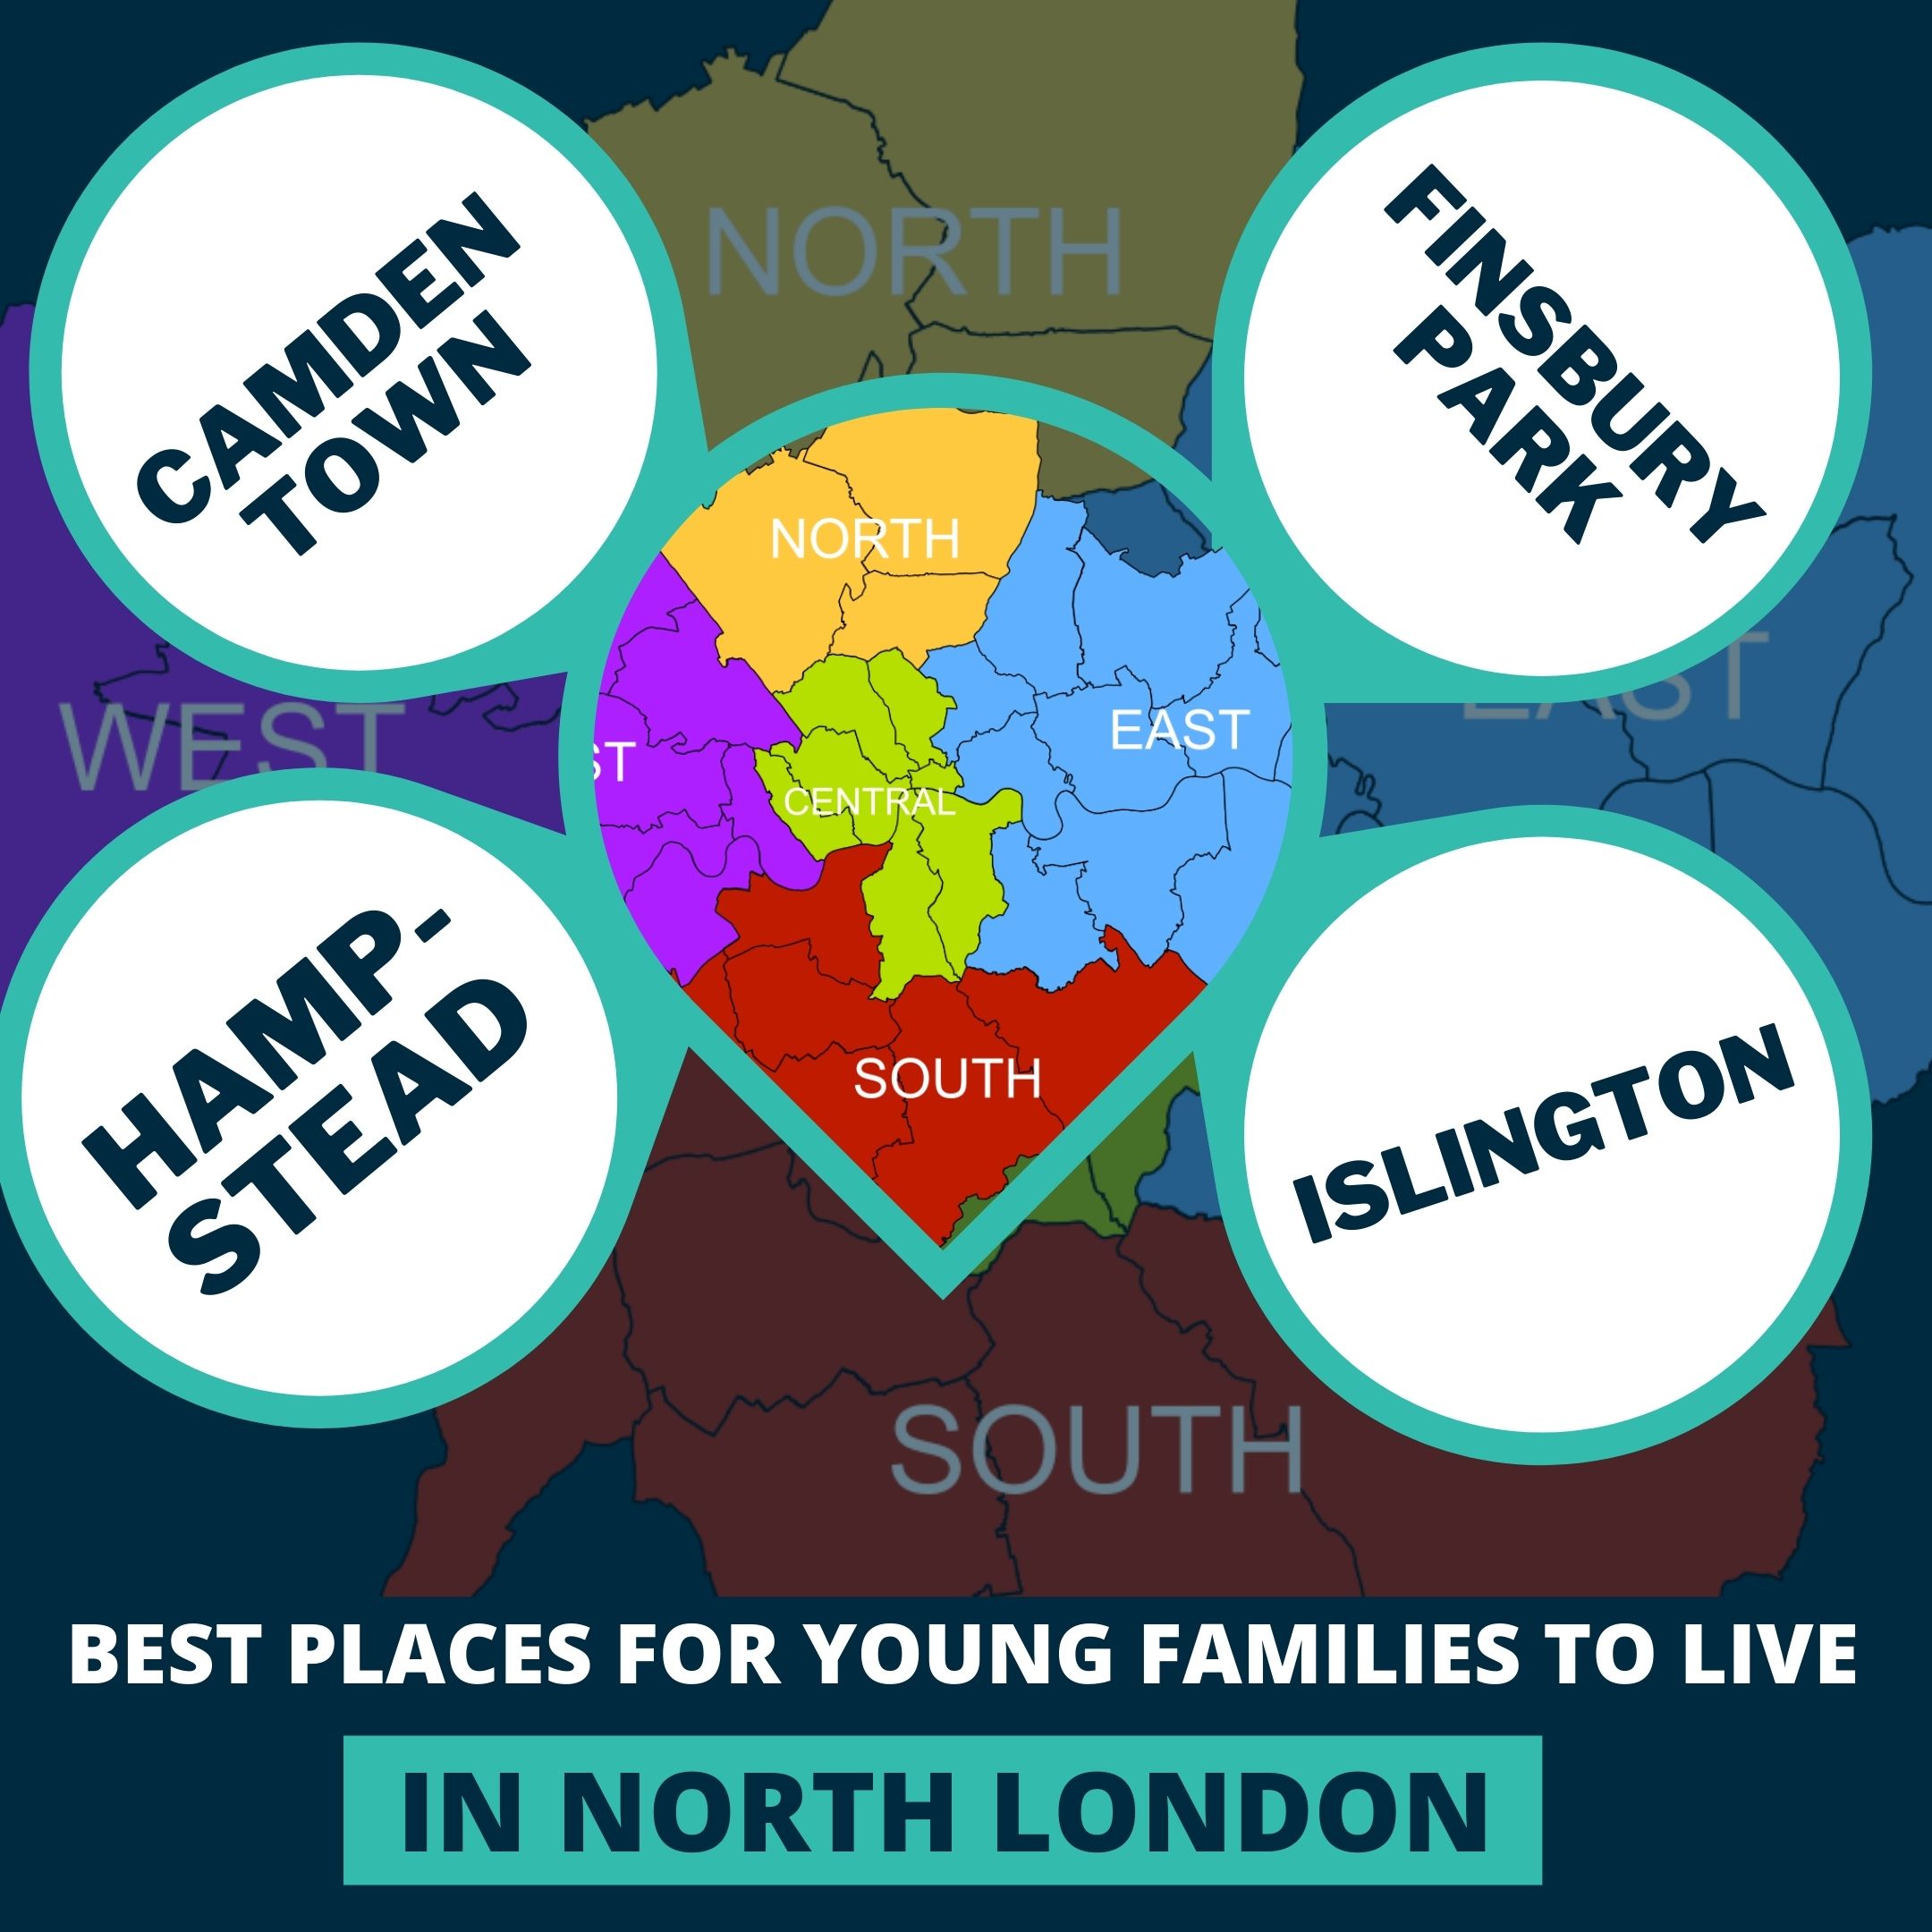 BEST PLACES FOR YOUNG FAMILIES TO LIVE IN NORTH LONDON